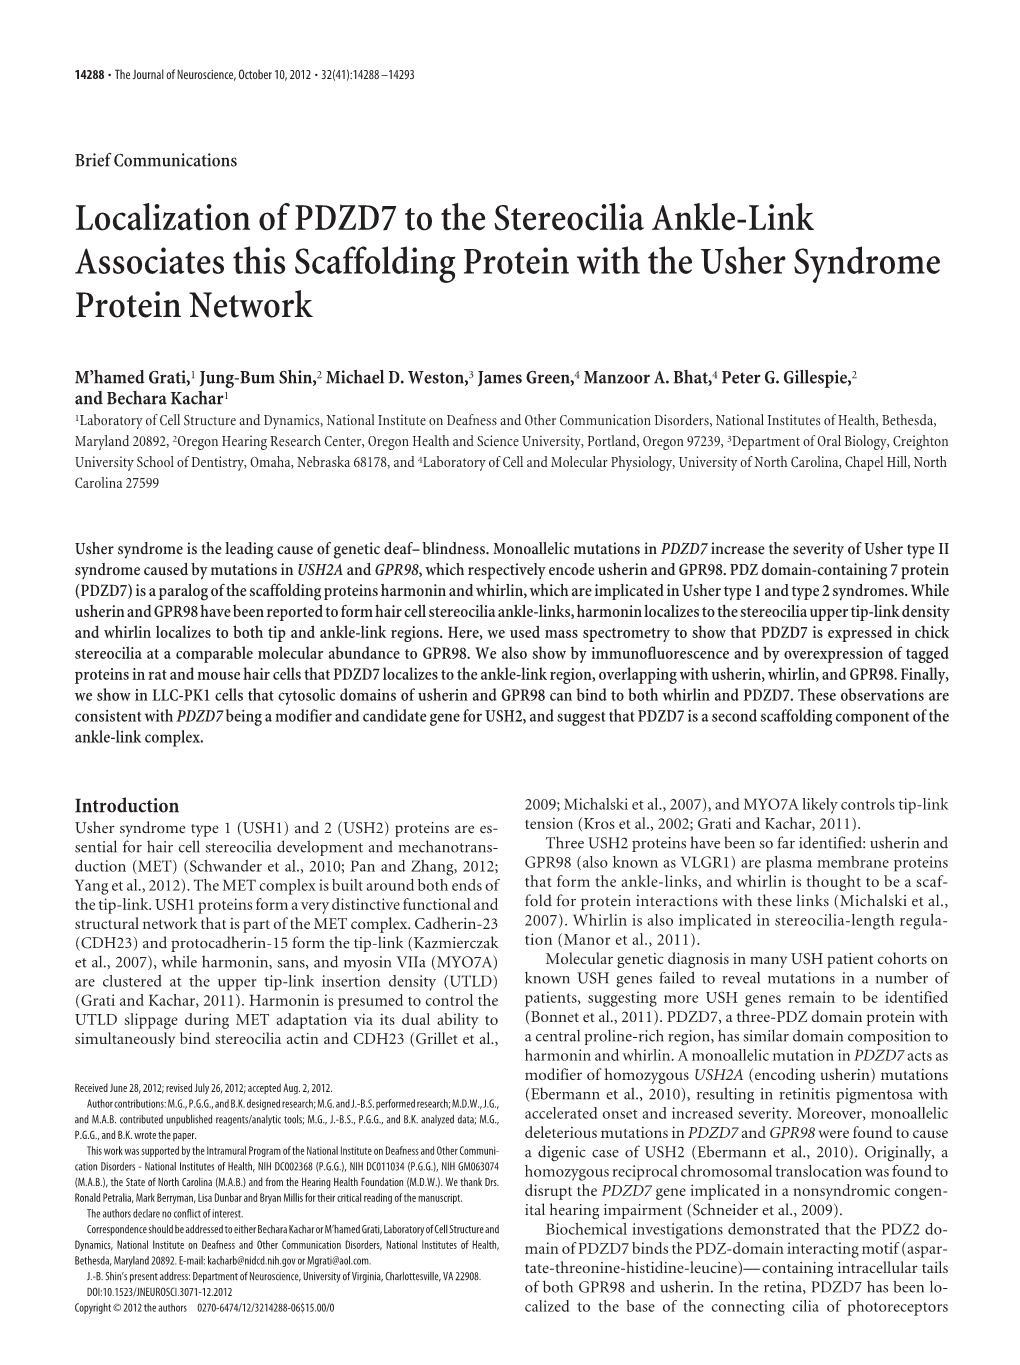 Localization of PDZD7 to the Stereocilia Ankle-Link Associates This Scaffolding Protein with the Usher Syndrome Protein Network